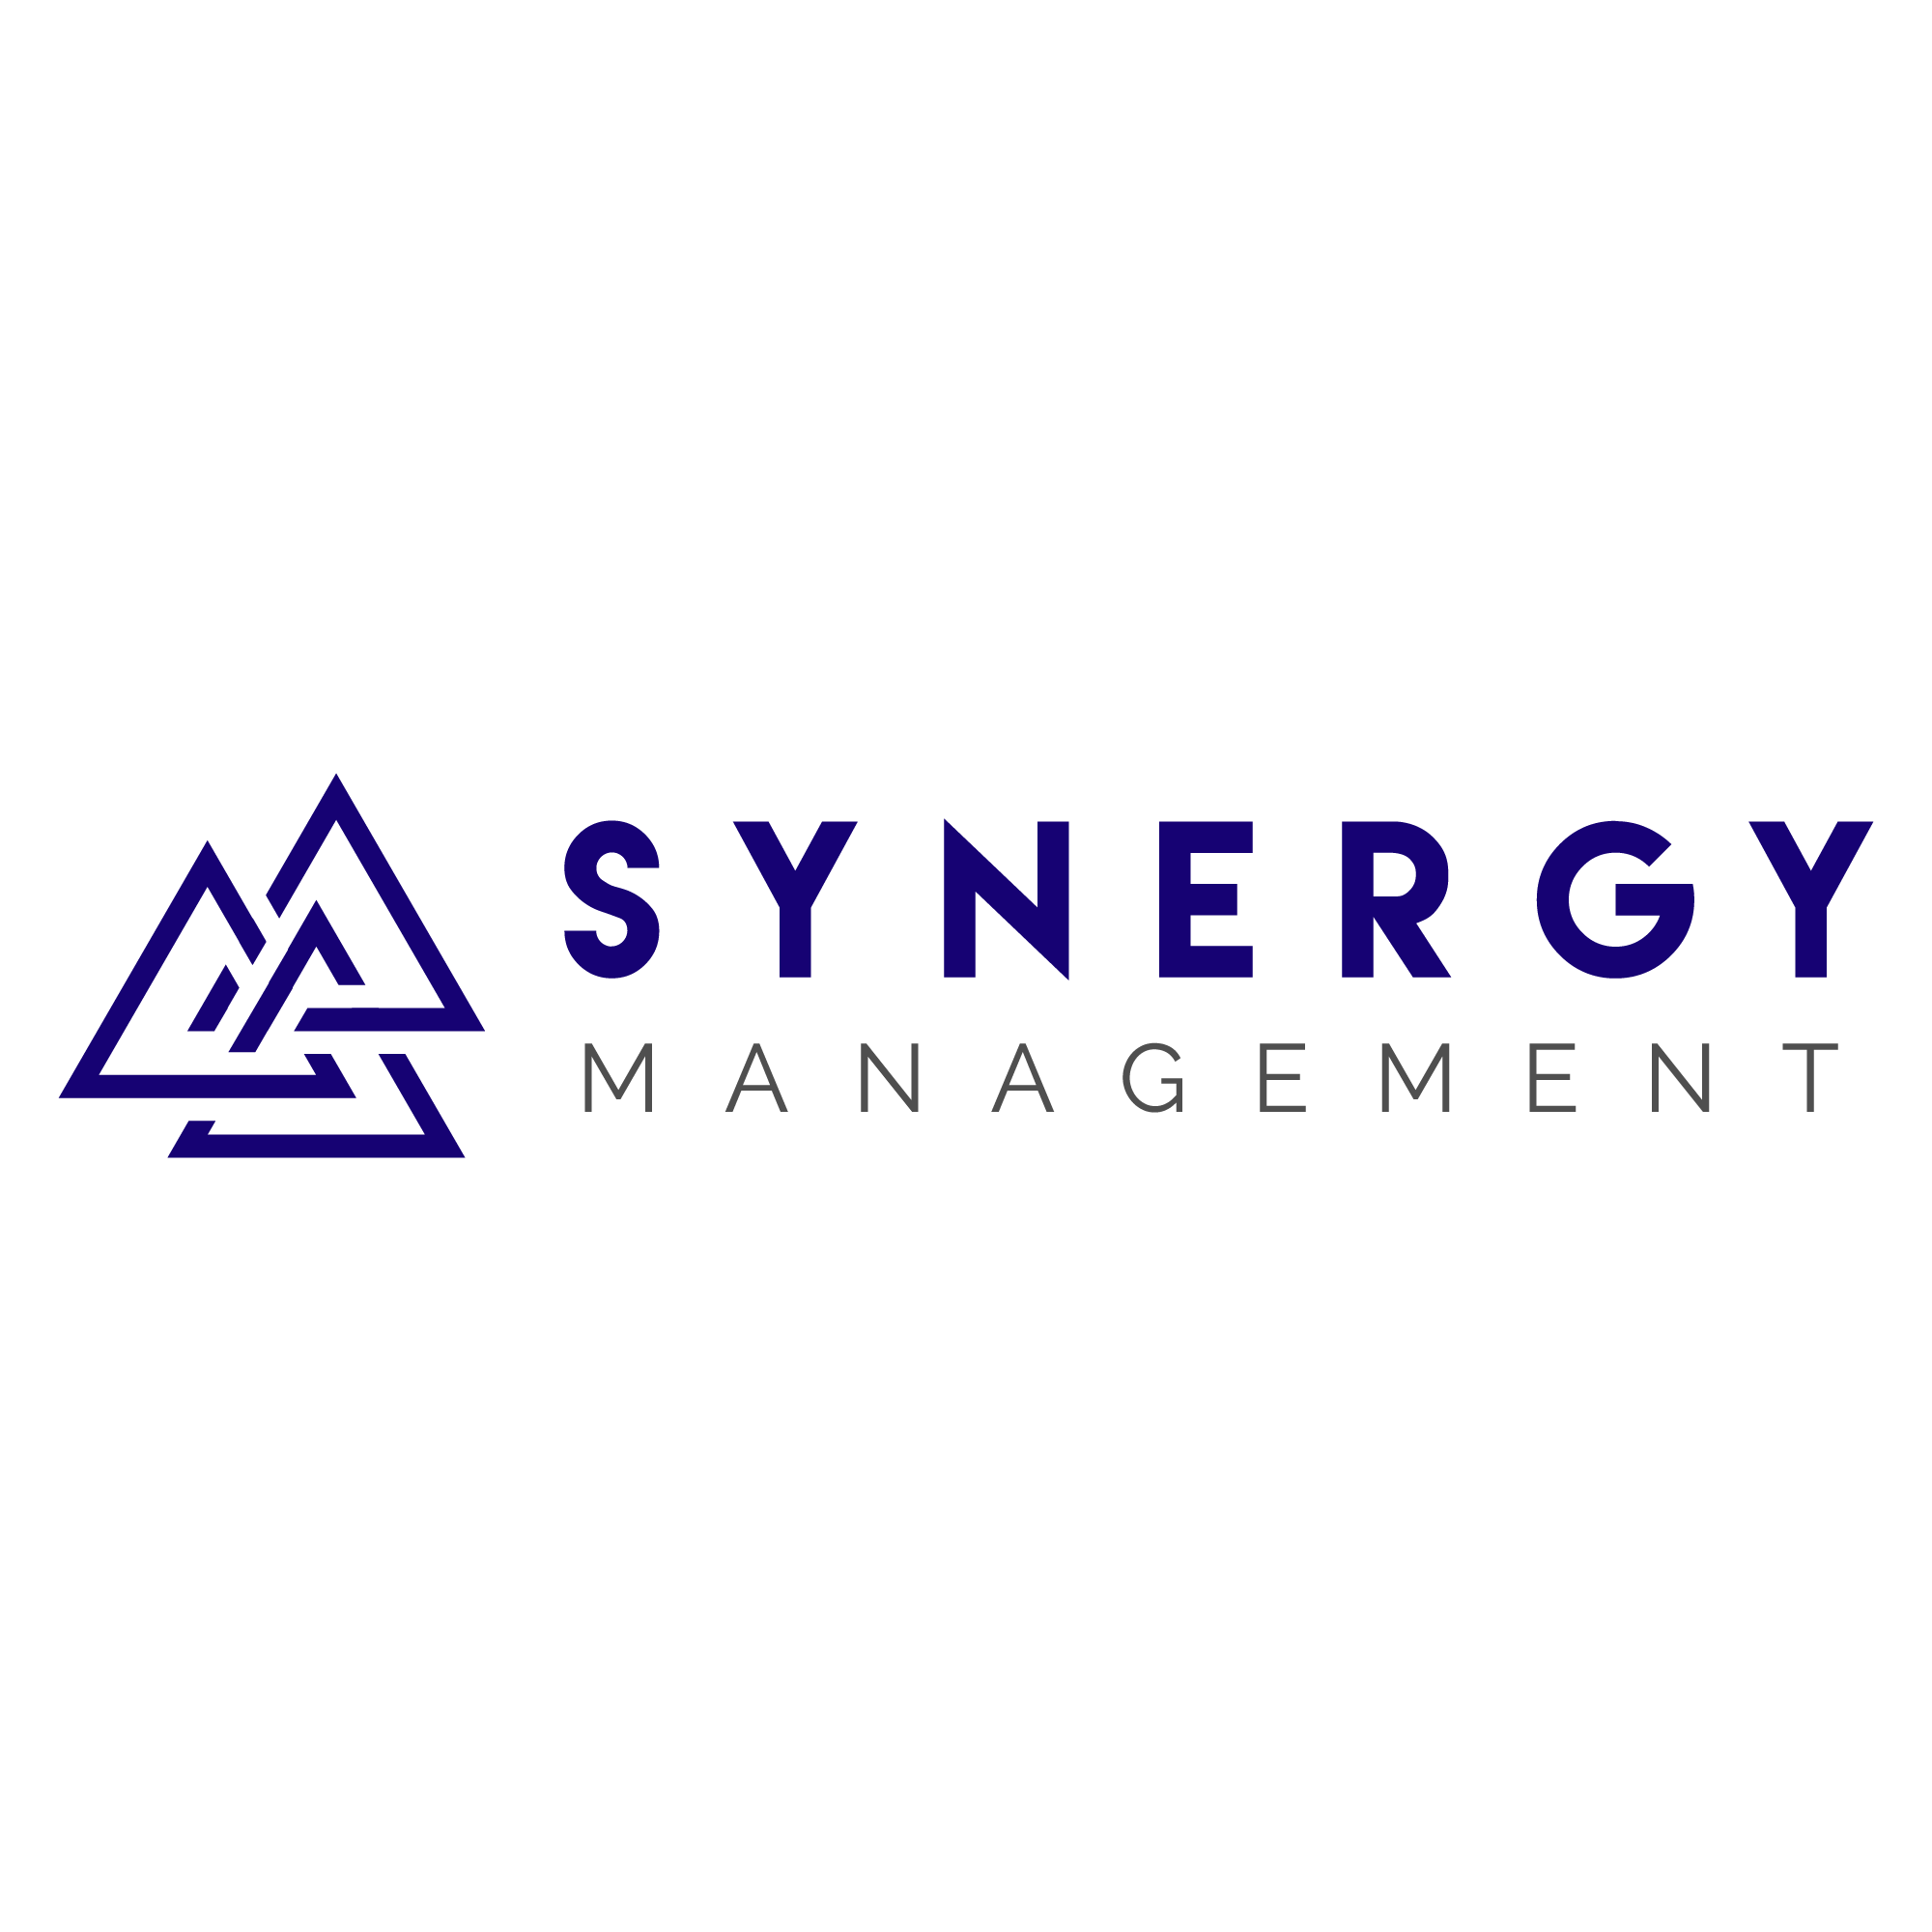 Distribution of information & actions taken on custodian/receiver cases and company officer/director appointments from Benjamin Berry & Synergy Management